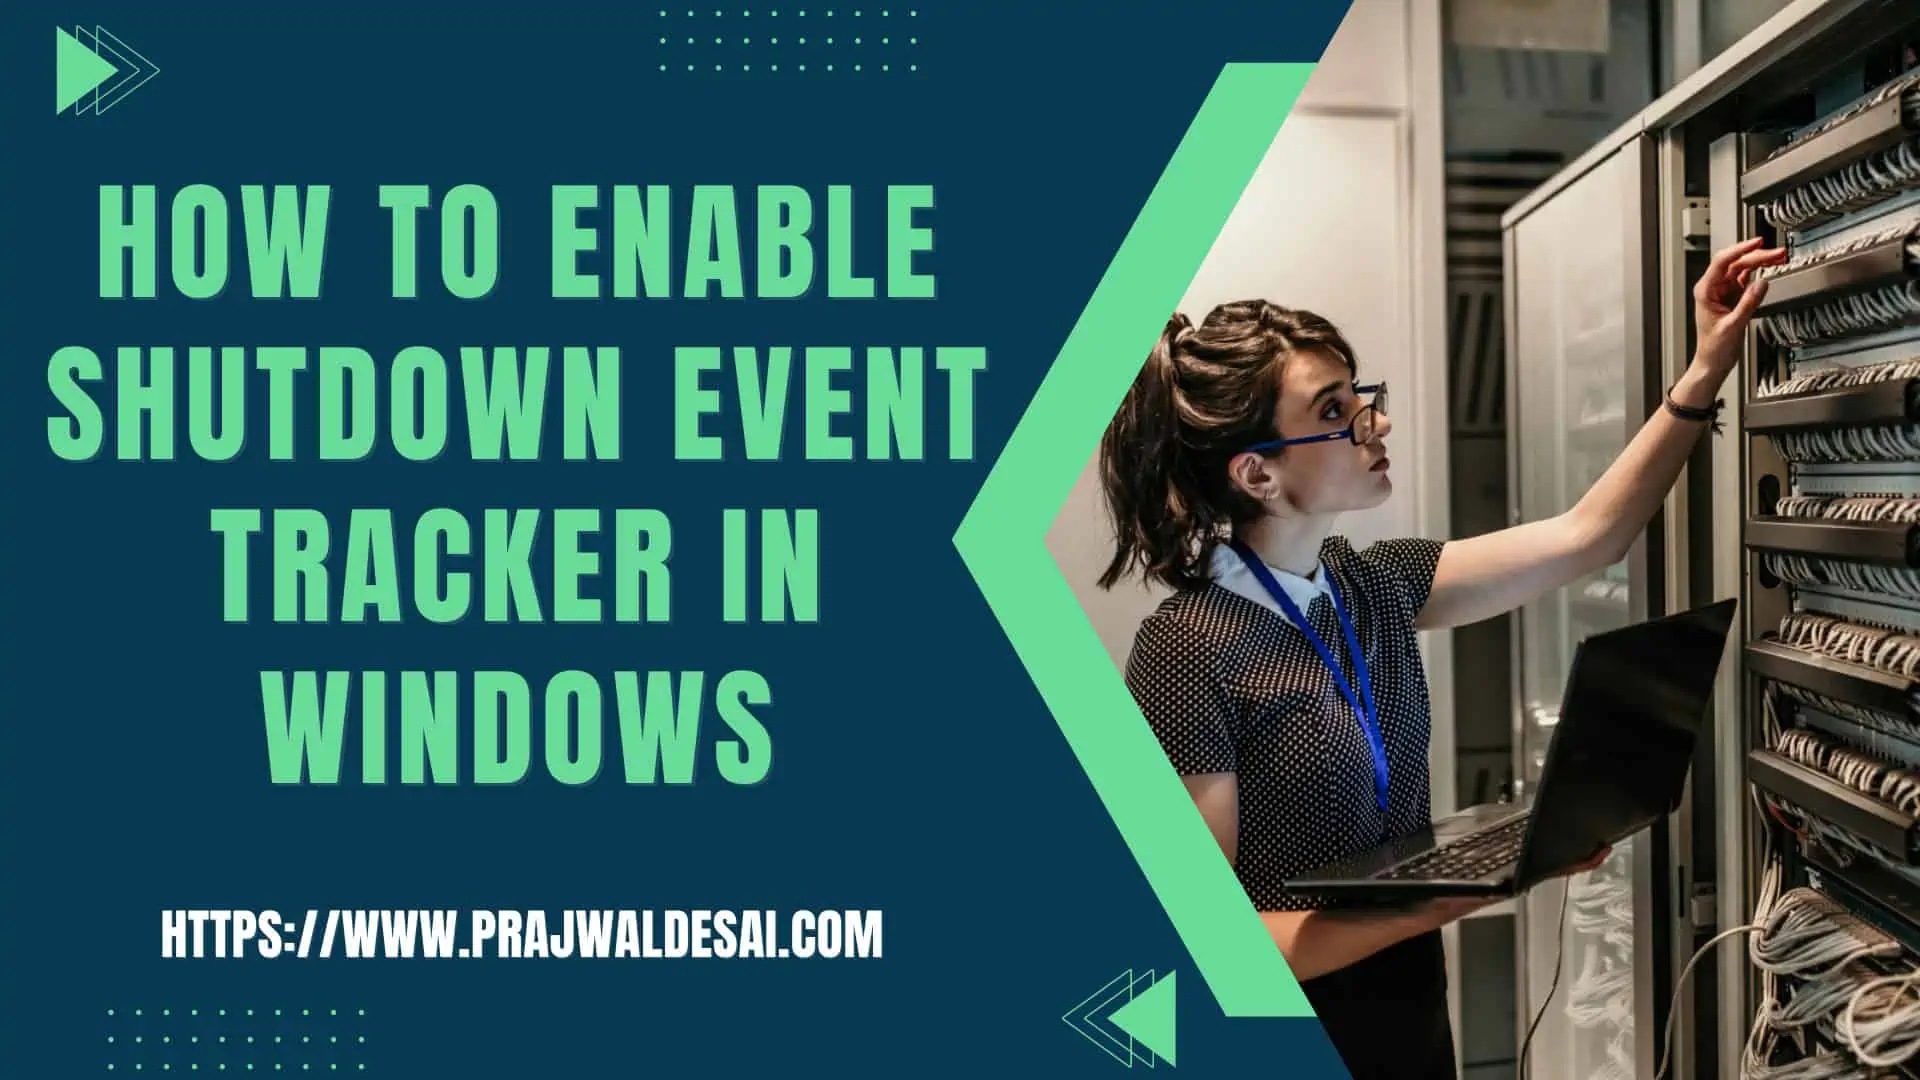 How To Enable Shutdown Event Tracker in Windows